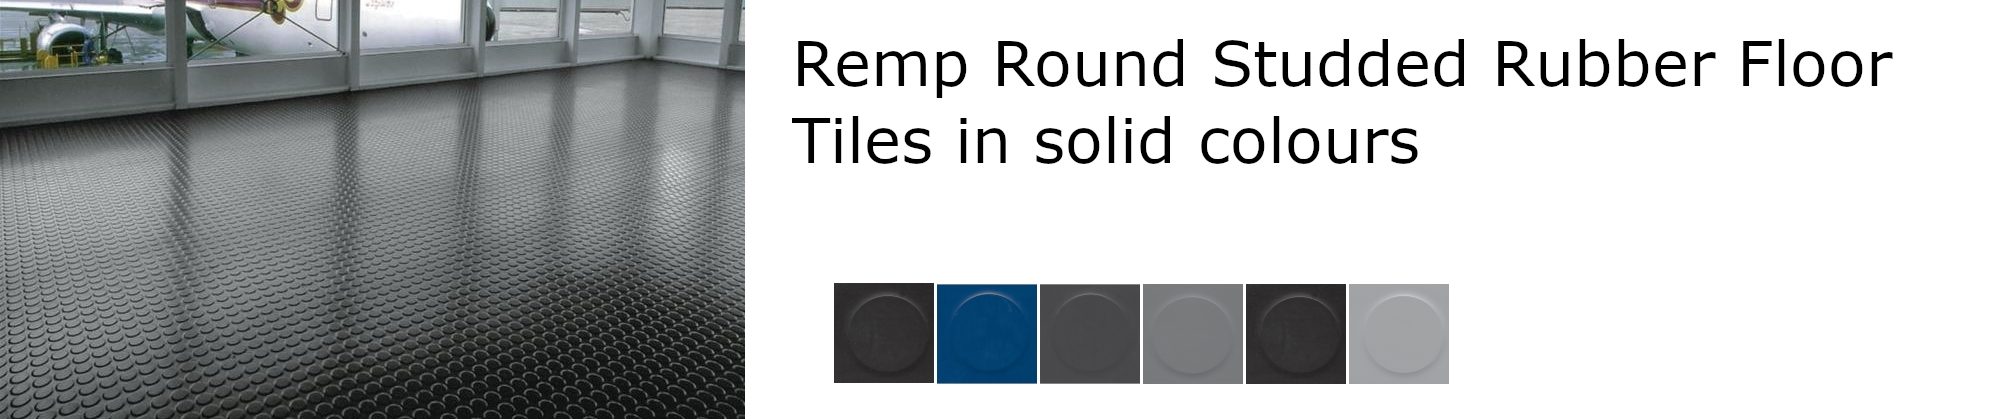 Remp Round Studded Rubber Flooring Tiles